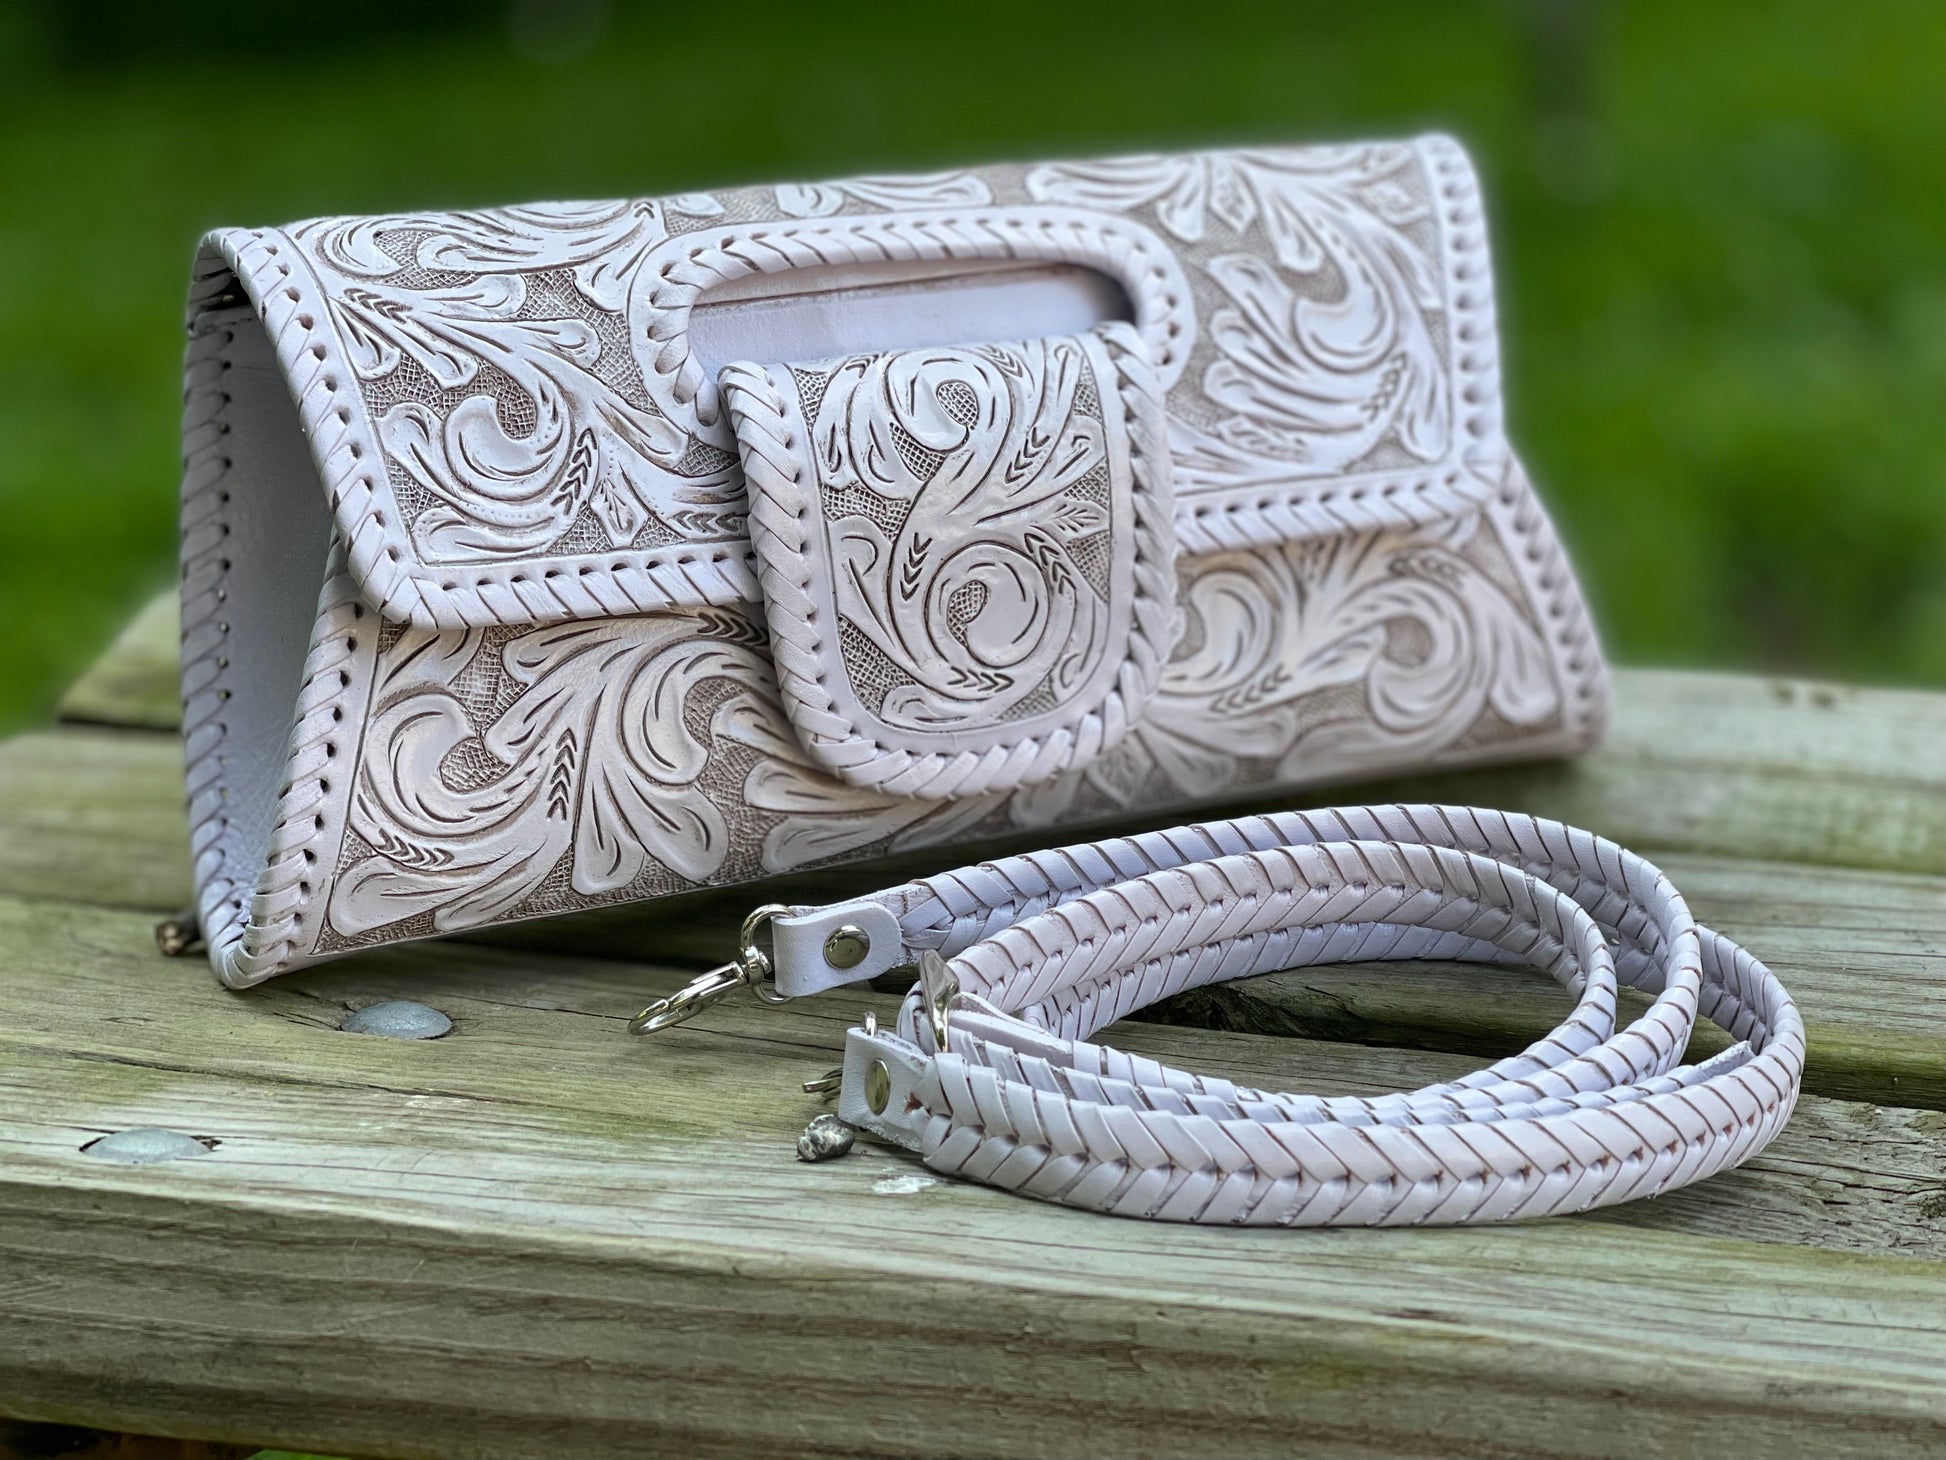 Hand-Tooled Leather Small Clutch & Crossbody "LENGUETA" by ALLE, more Colors - ALLE Handbags